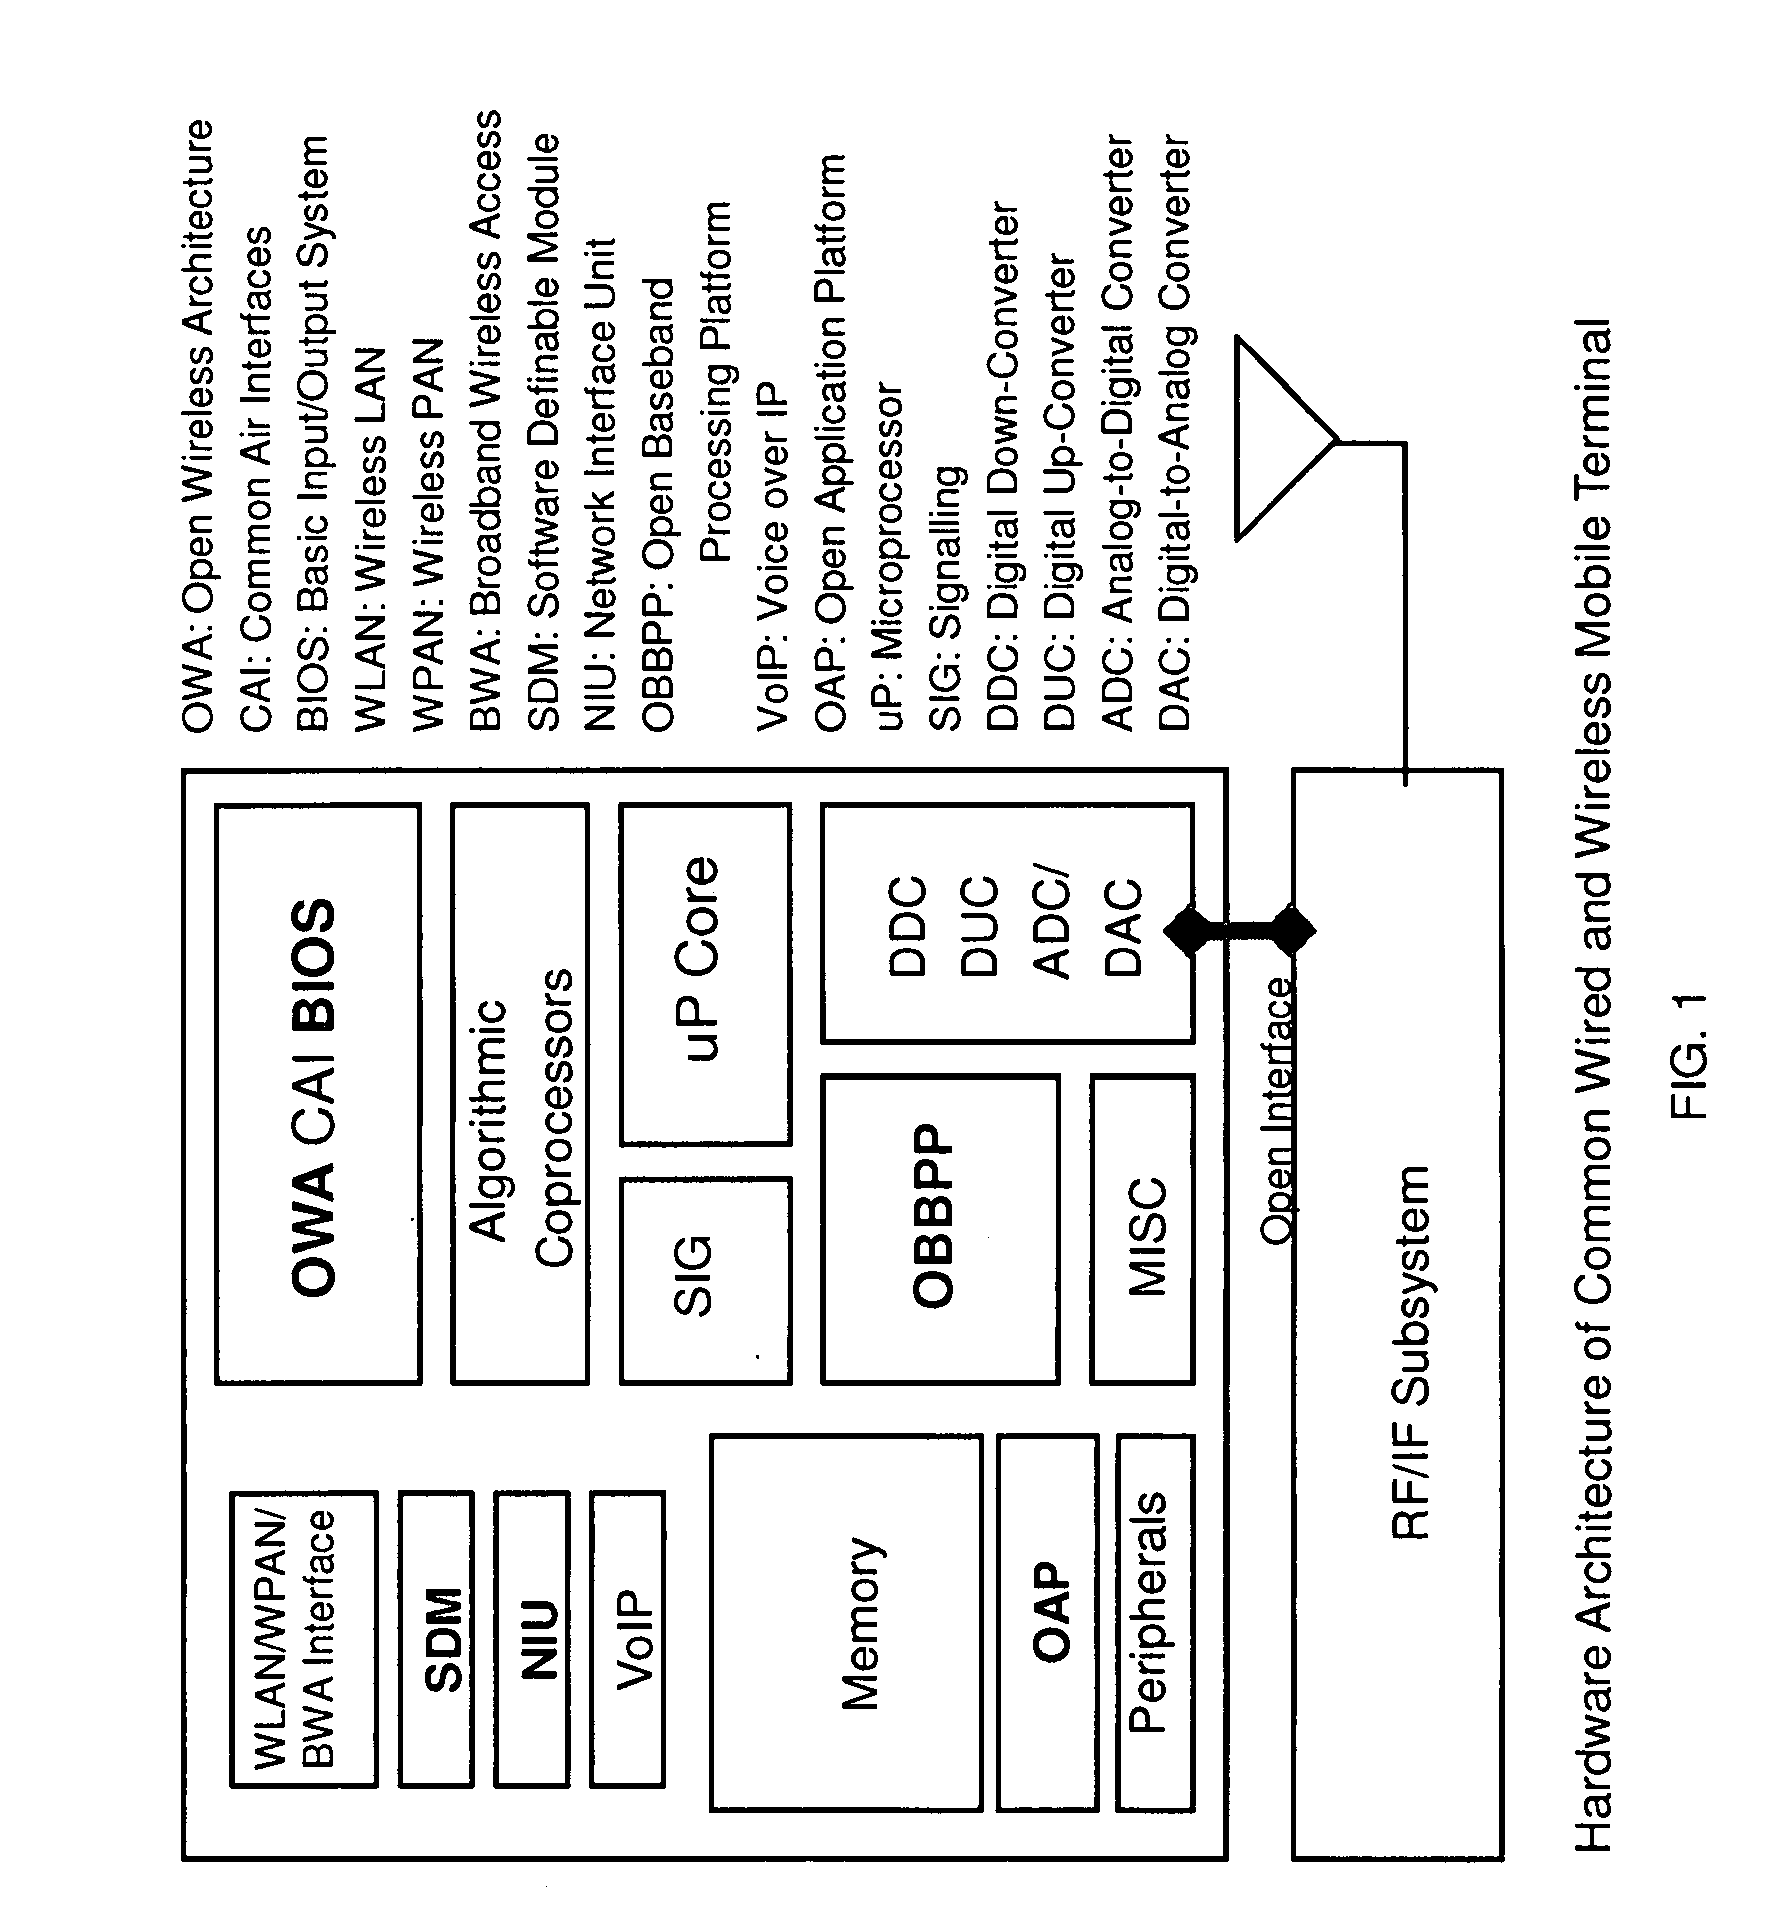 Common Communication Terminal Architecture and Method